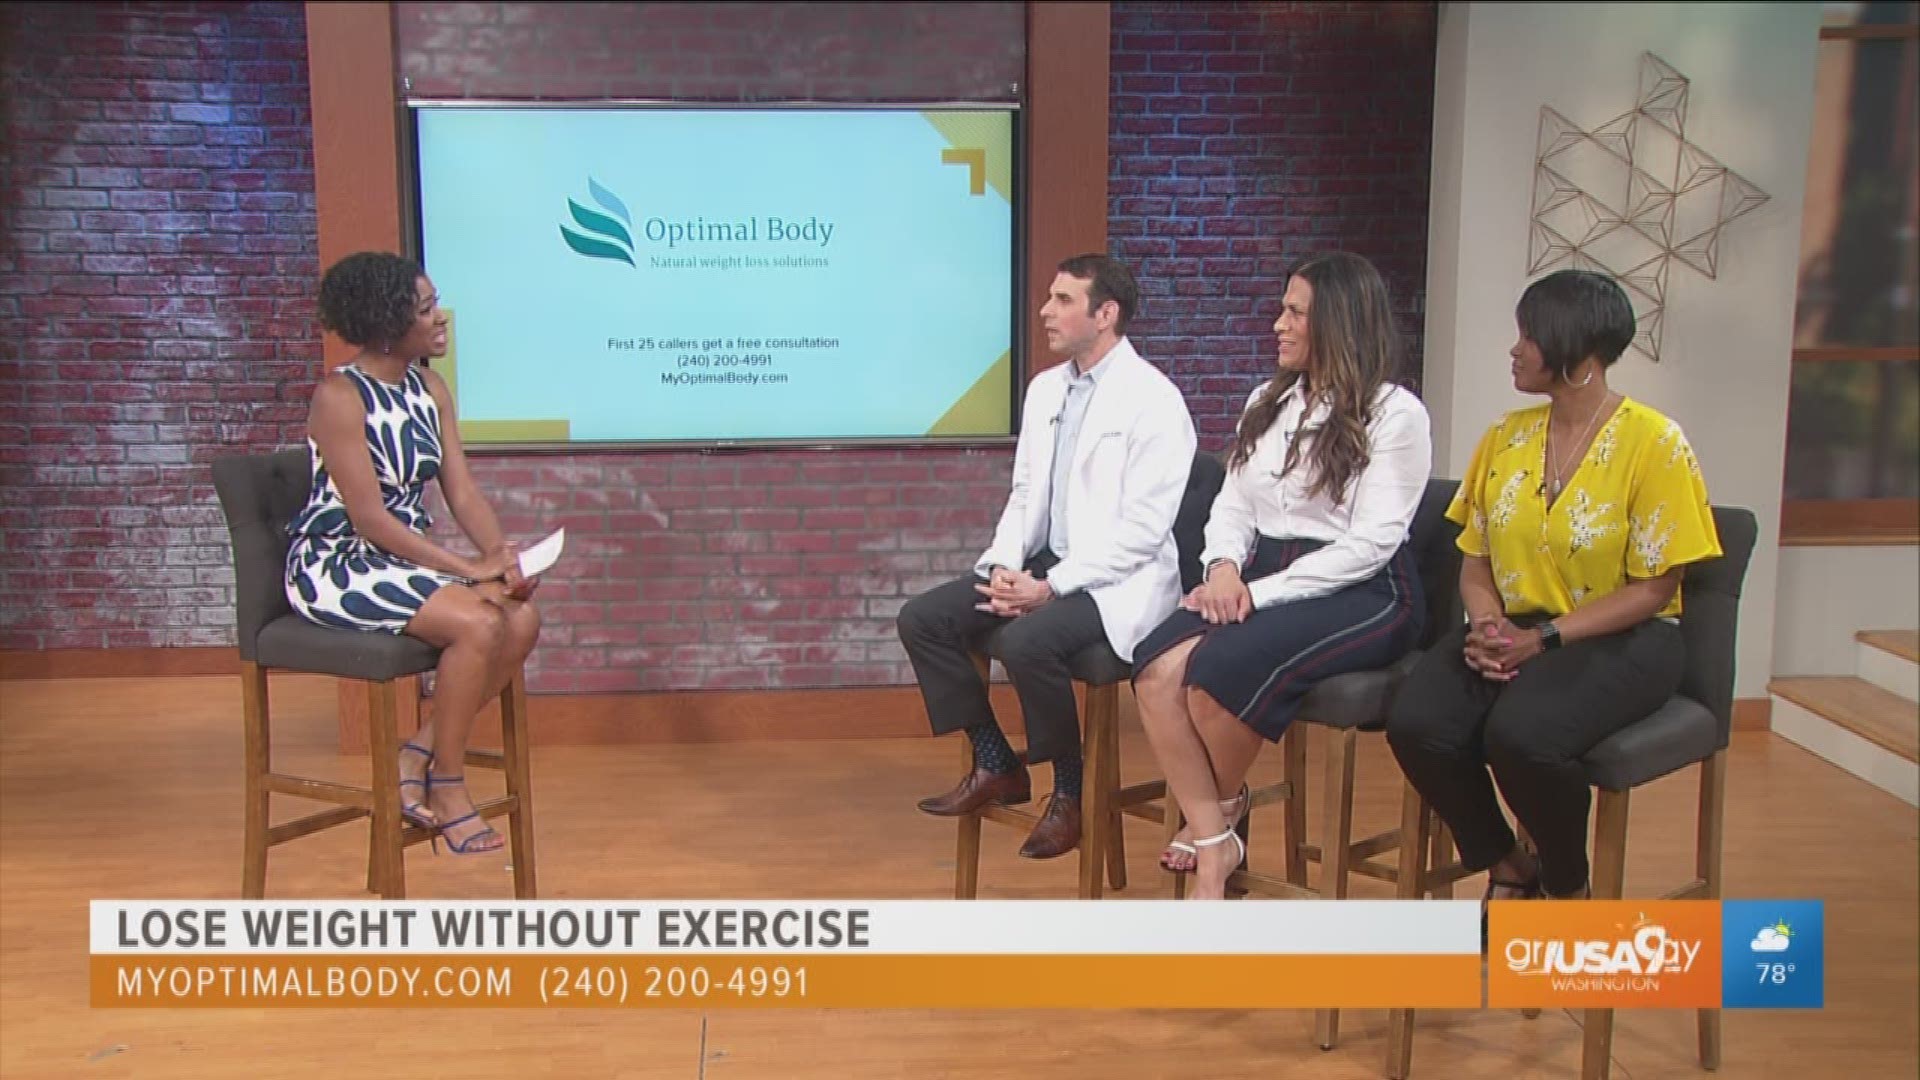 Find out how you can lose weight without exercise just in time for the summer.  Dr. Cory Aplin and Rena James explain the weight loss program at Optimal Body.  For more information call (240) 200-4991 or visit MyOptimalBody.com.